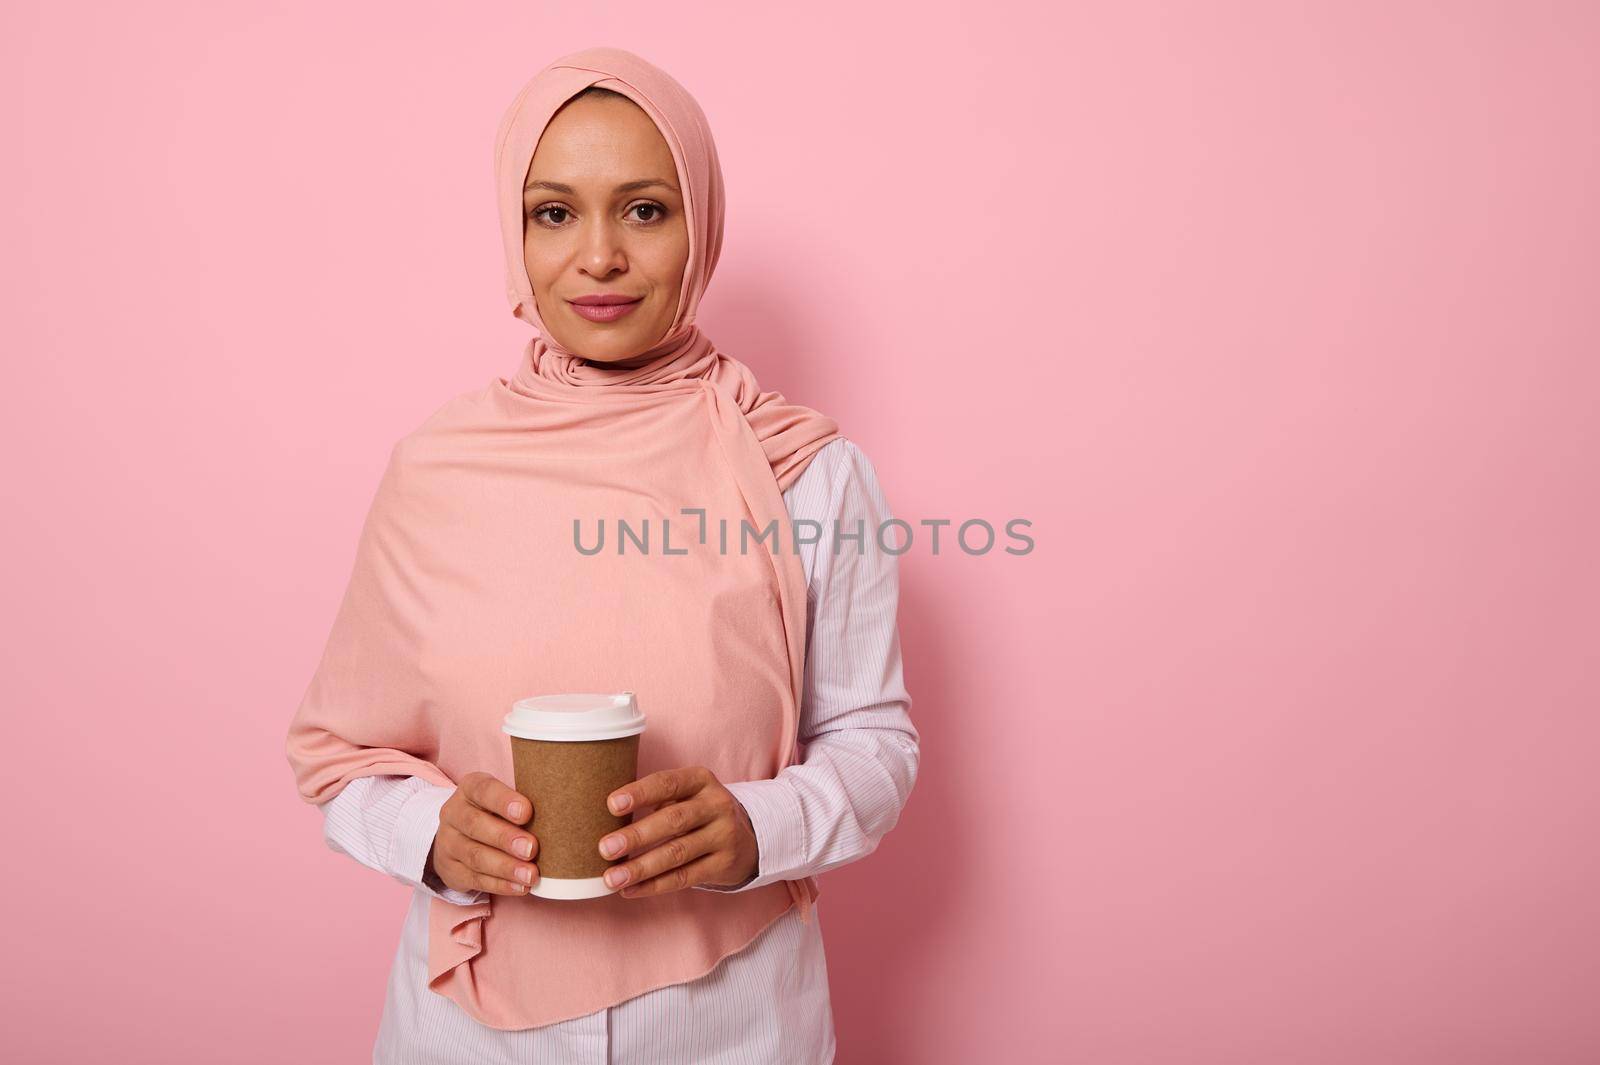 Arab Muslim beautiful woman wearing pink hijab and white shirt holding a recyclable disposable ecological paper mug in her hands, looking at camera posing on colored background with copy space